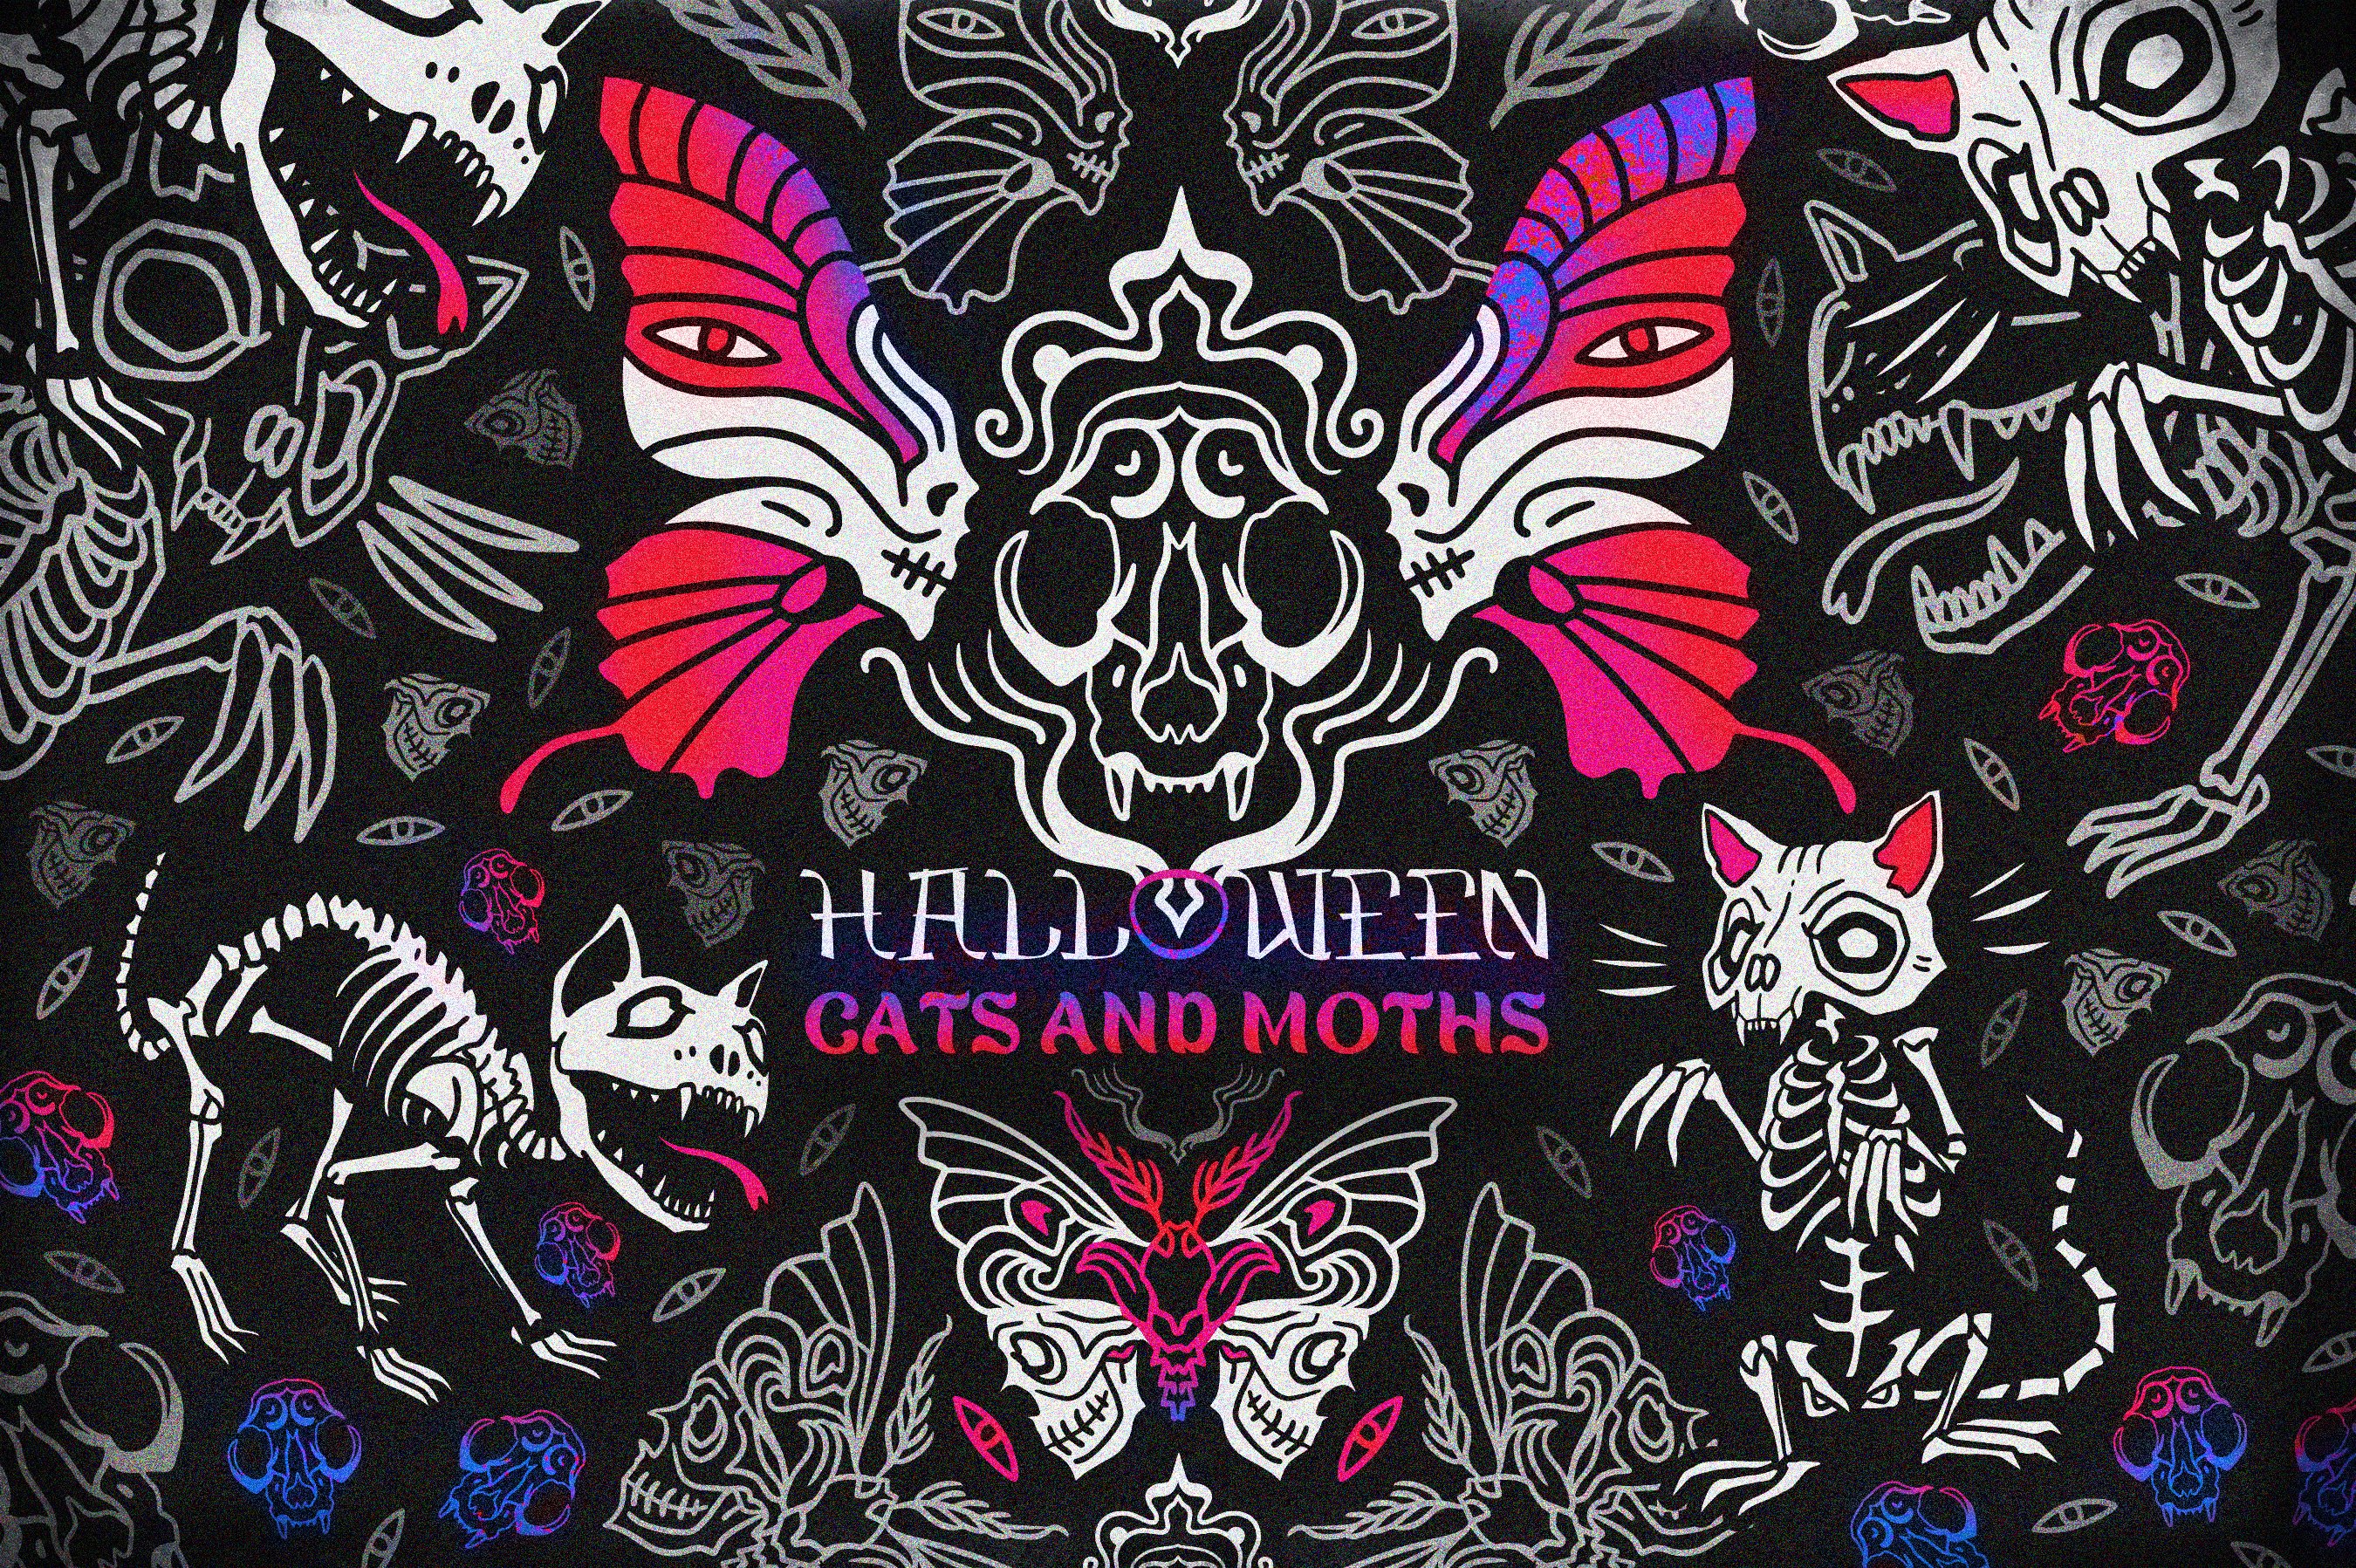 Halloween cats and moths cover image.